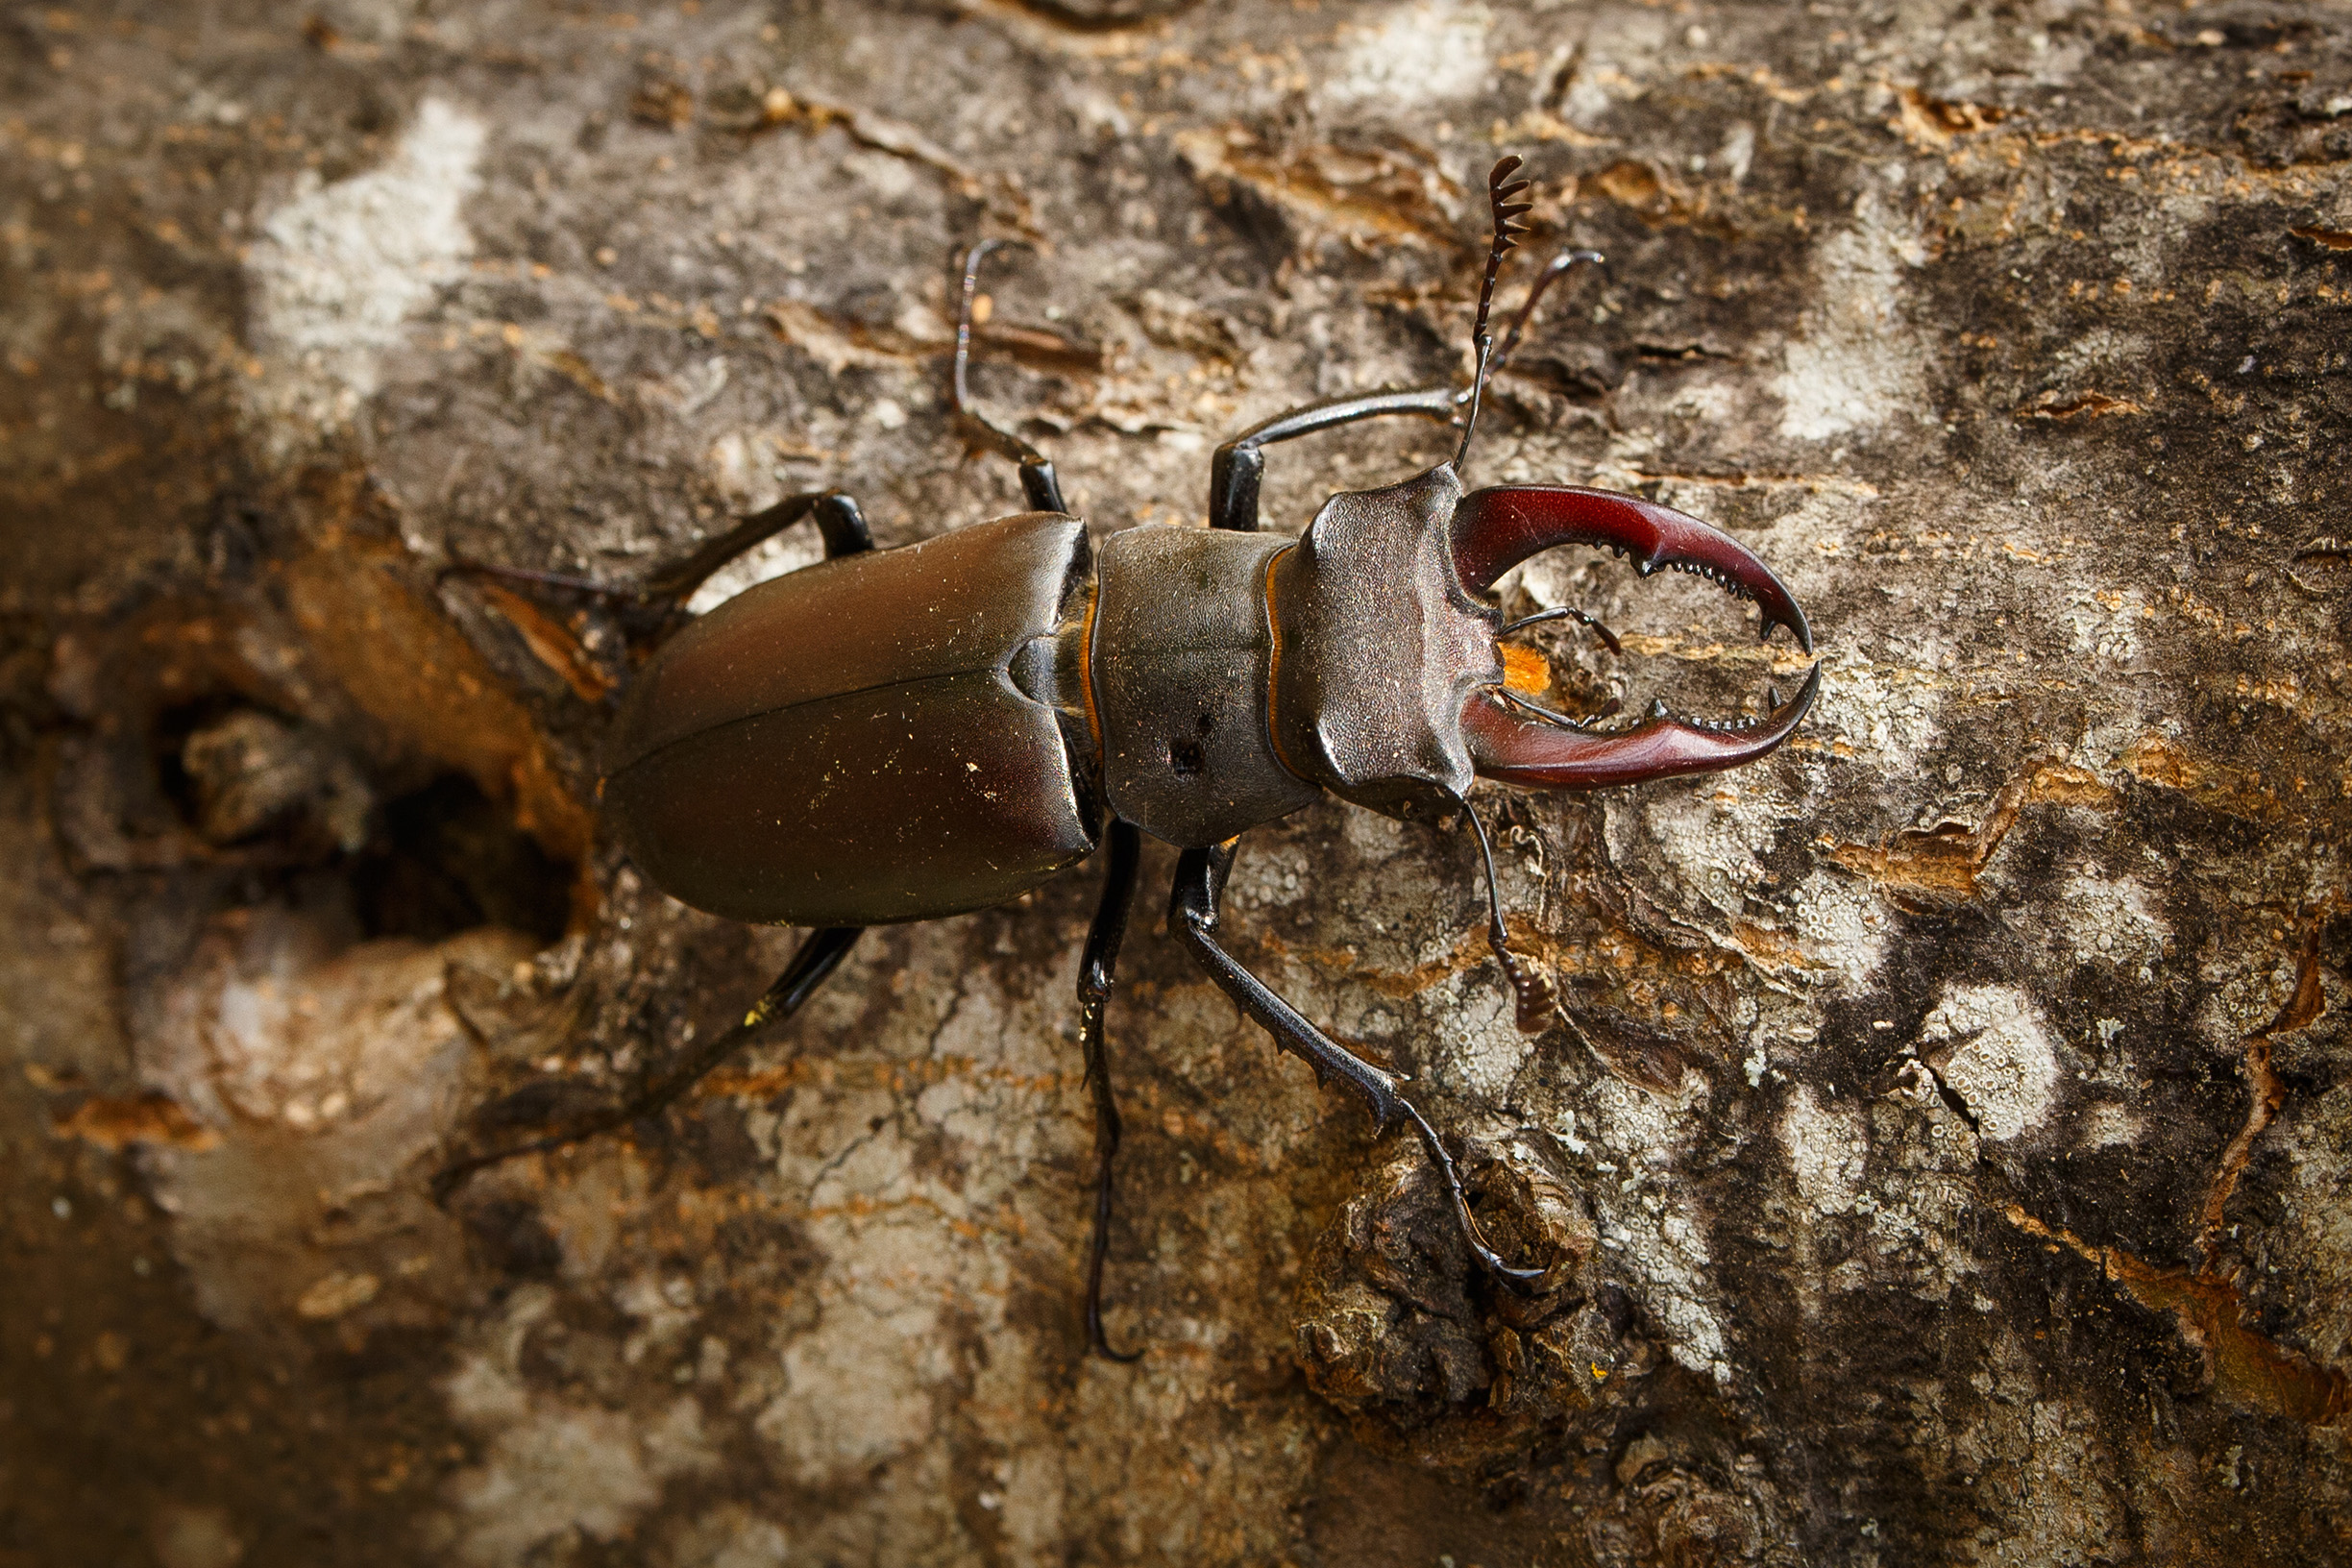 The European stag beetle can be up to 3 inches long. Males have massive "horns" that stick out in front of their head.